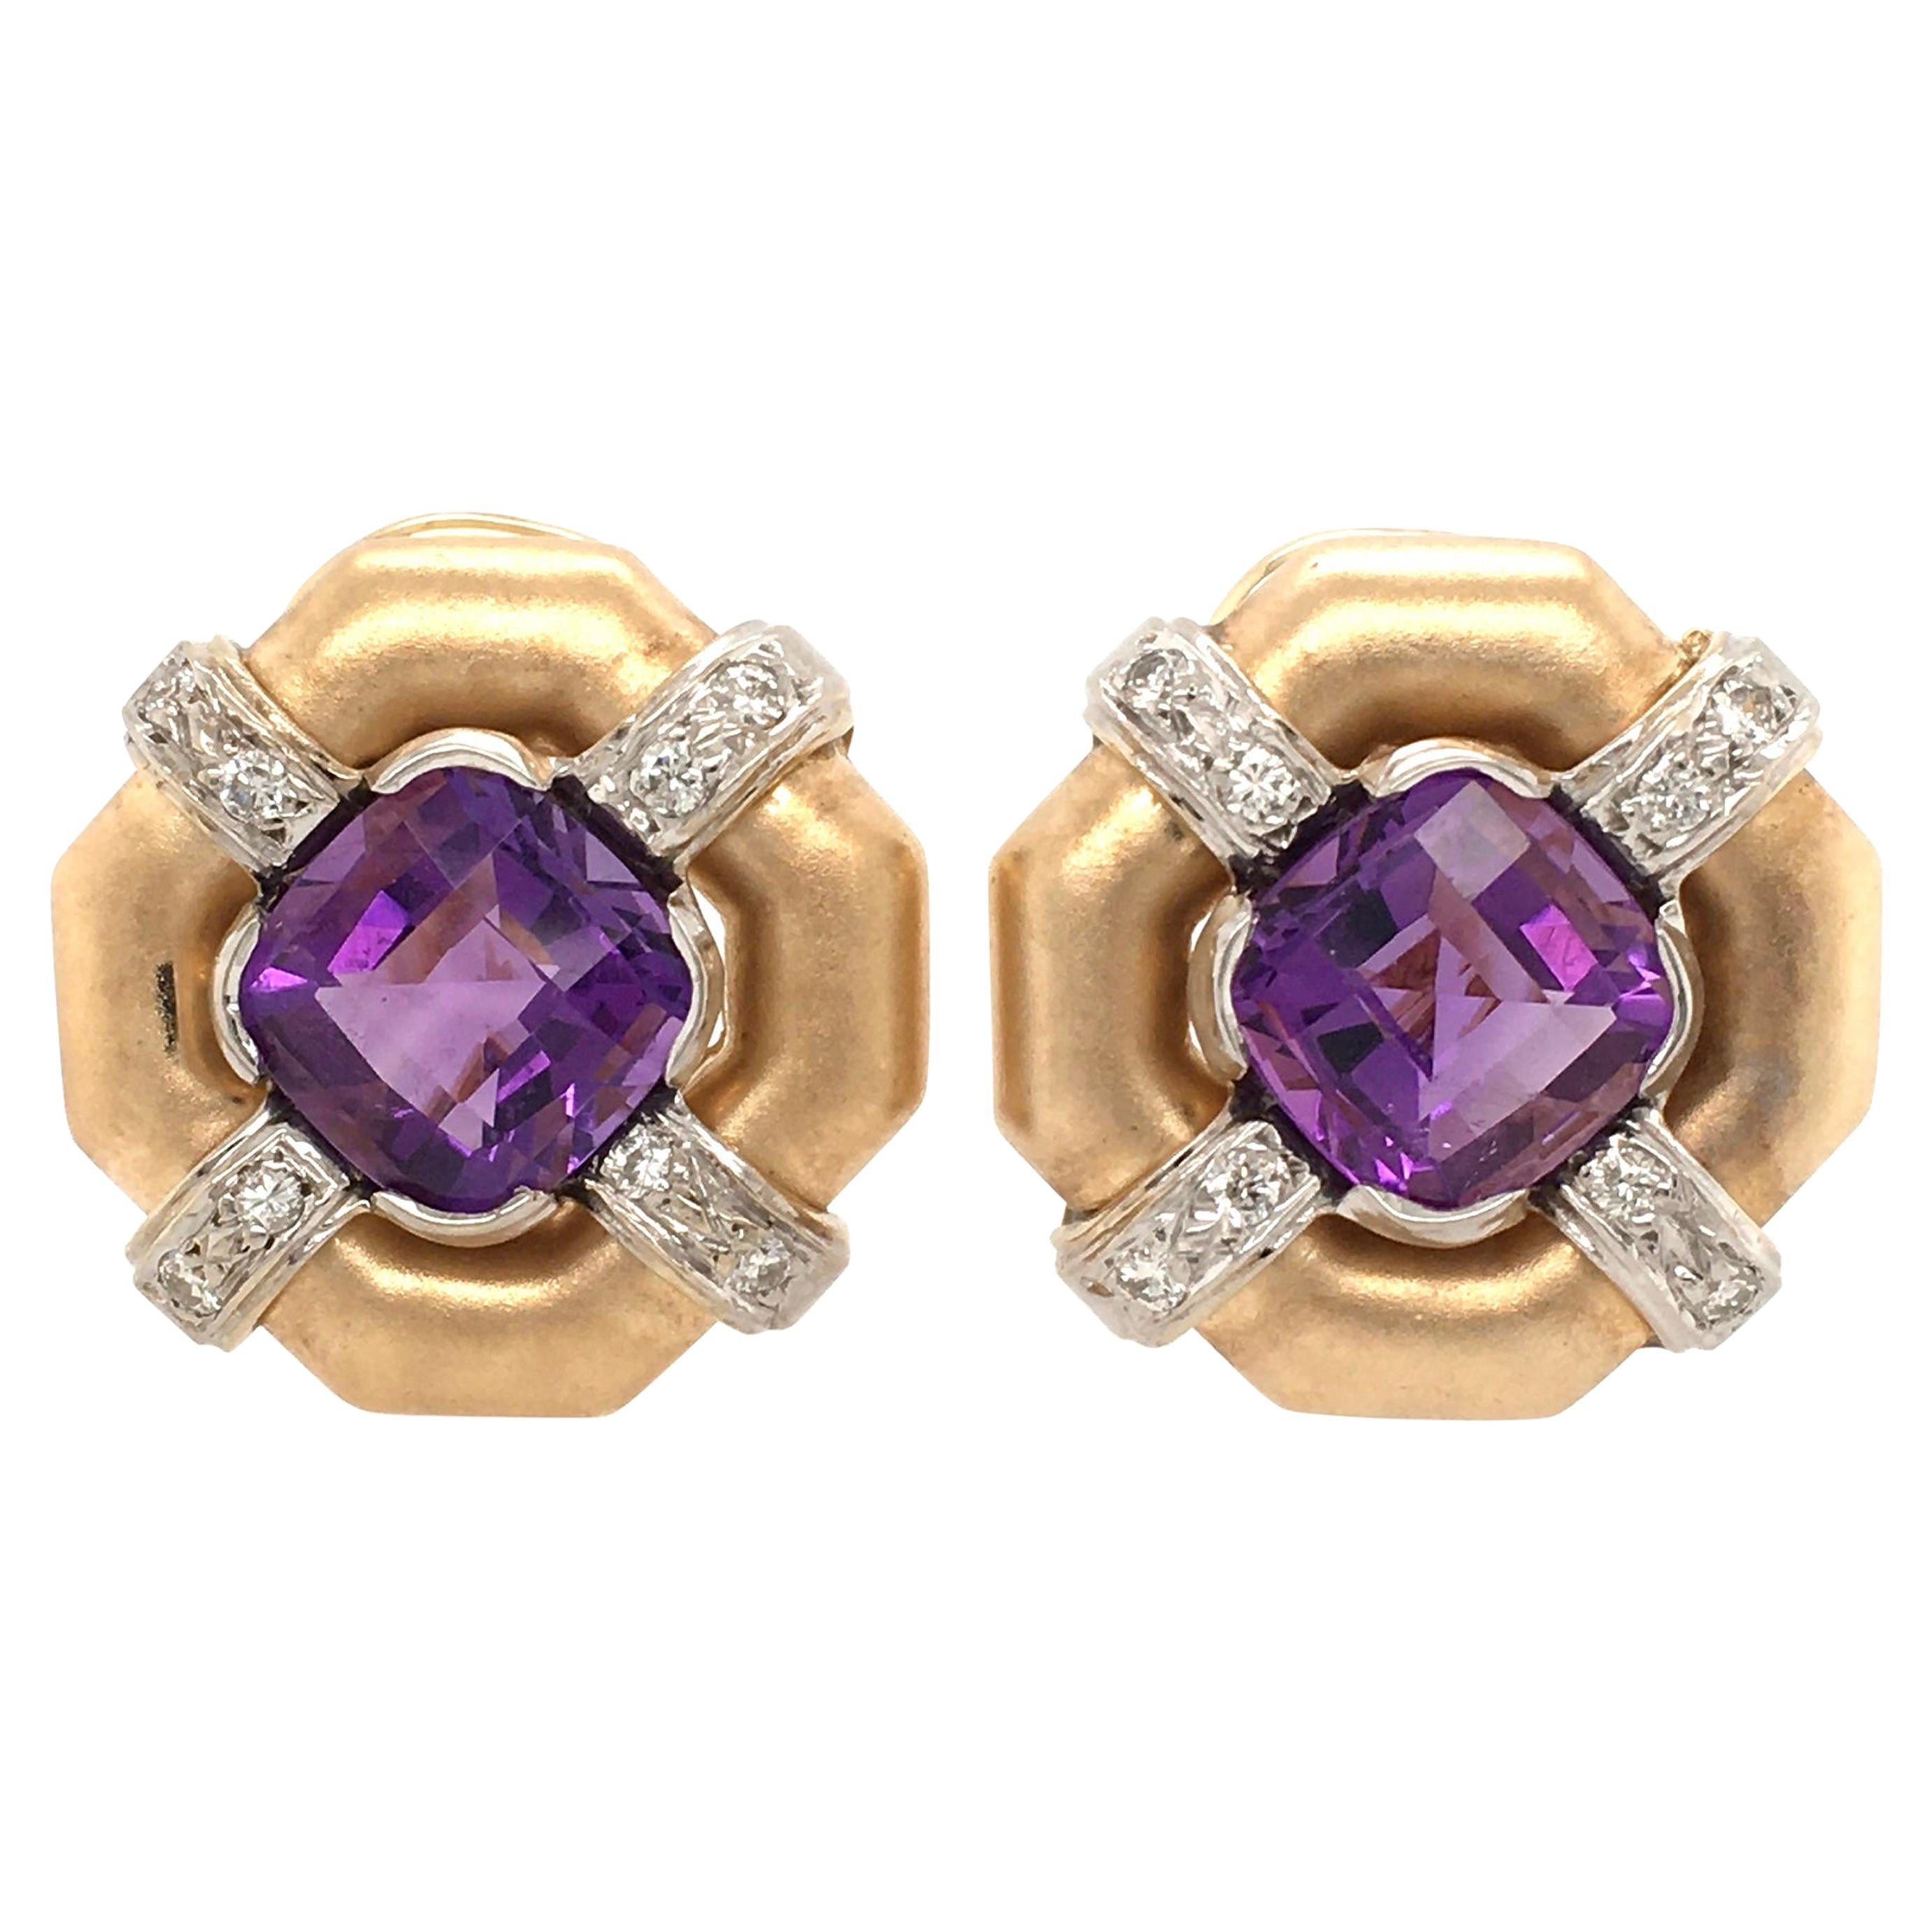 Pair of Amethyst, Gold and Diamond Earrings